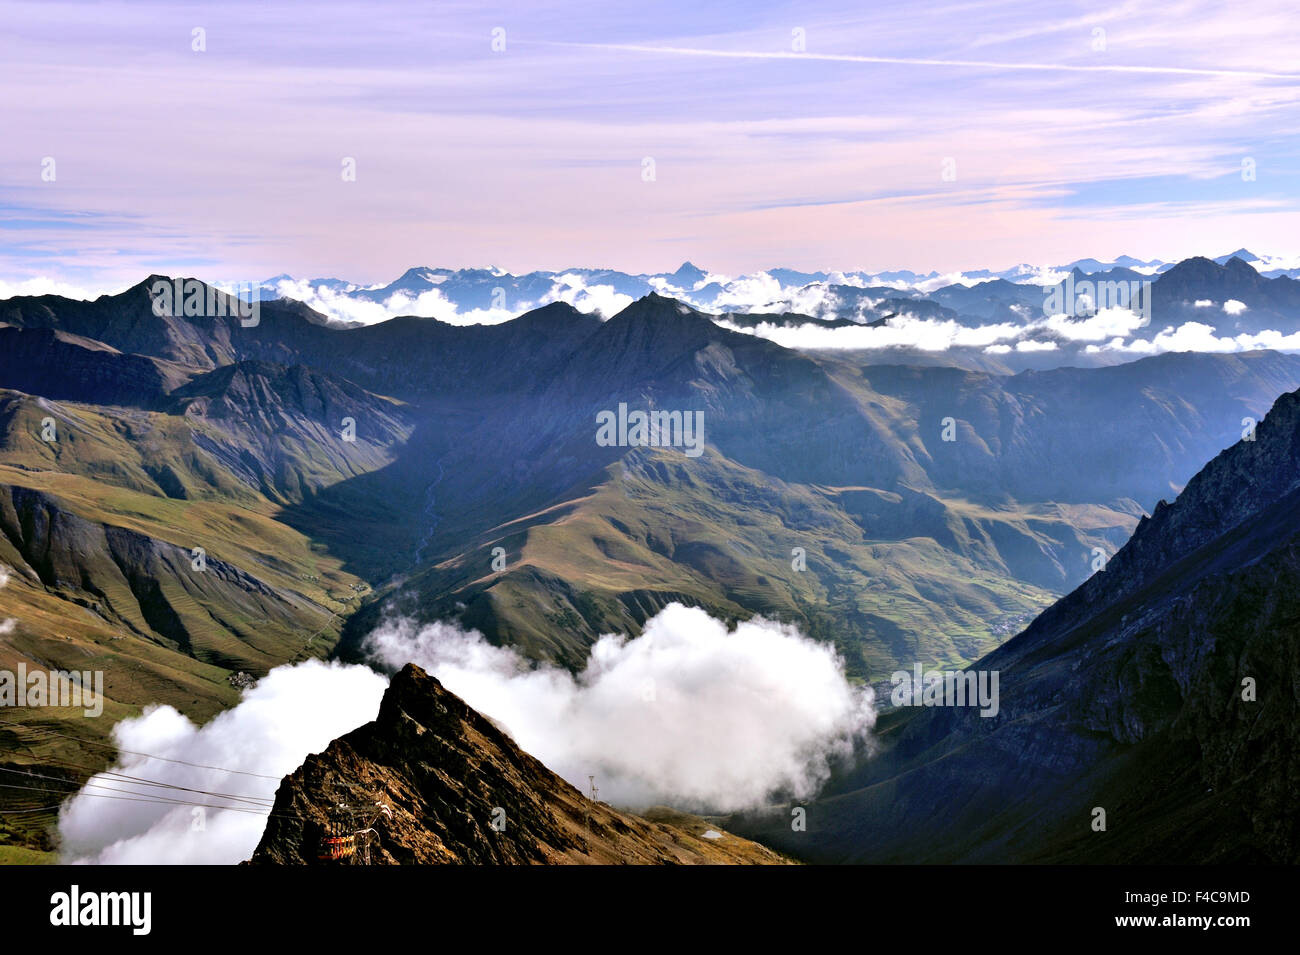 Panorama of the Alps in the early morning, mountain tops over clouds, view from La Meije, region of the Écrins, Alps, France Stock Photo